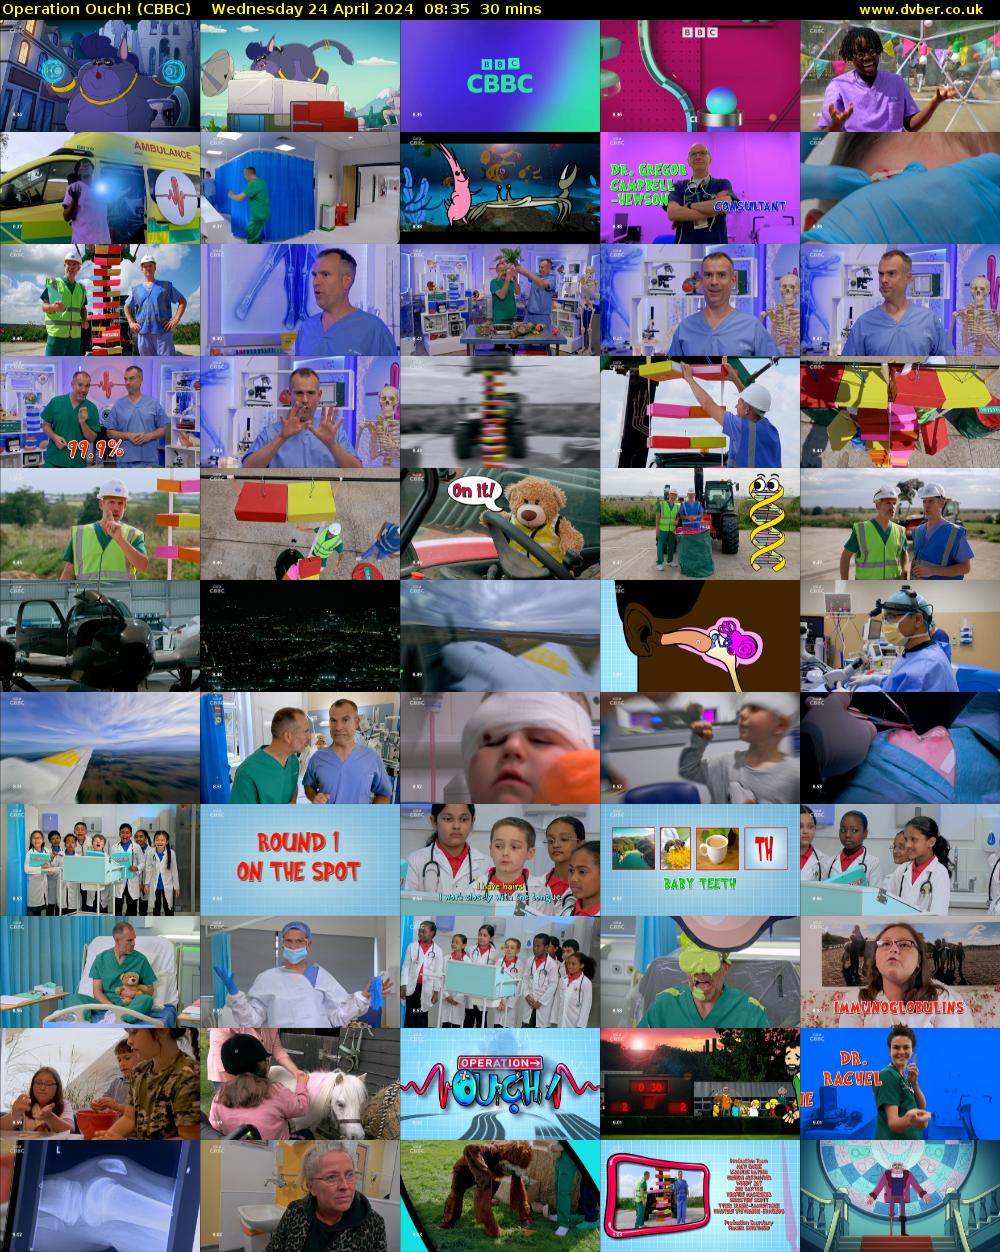 Operation Ouch! (CBBC) Wednesday 24 April 2024 08:35 - 09:05